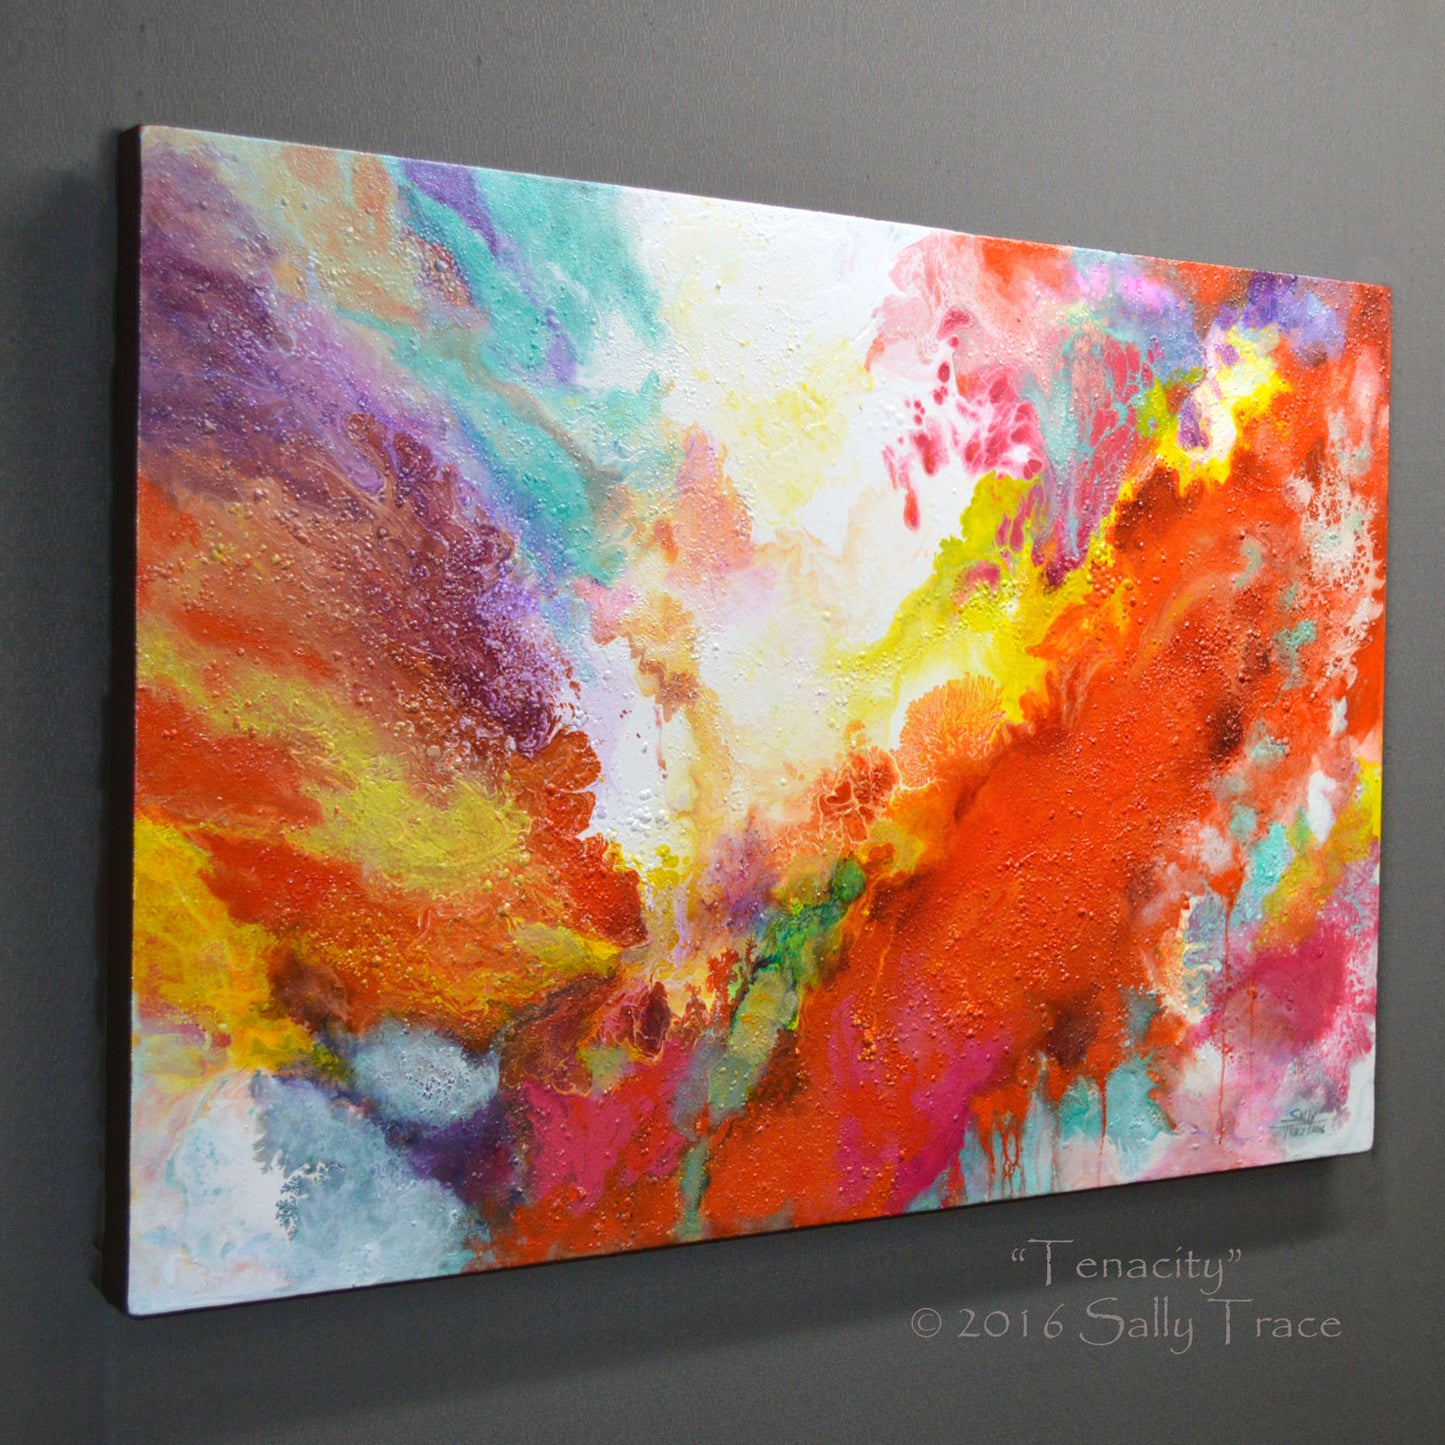 Original contemporary fluid abstract art for sale by Sally Trace "Tenacity"